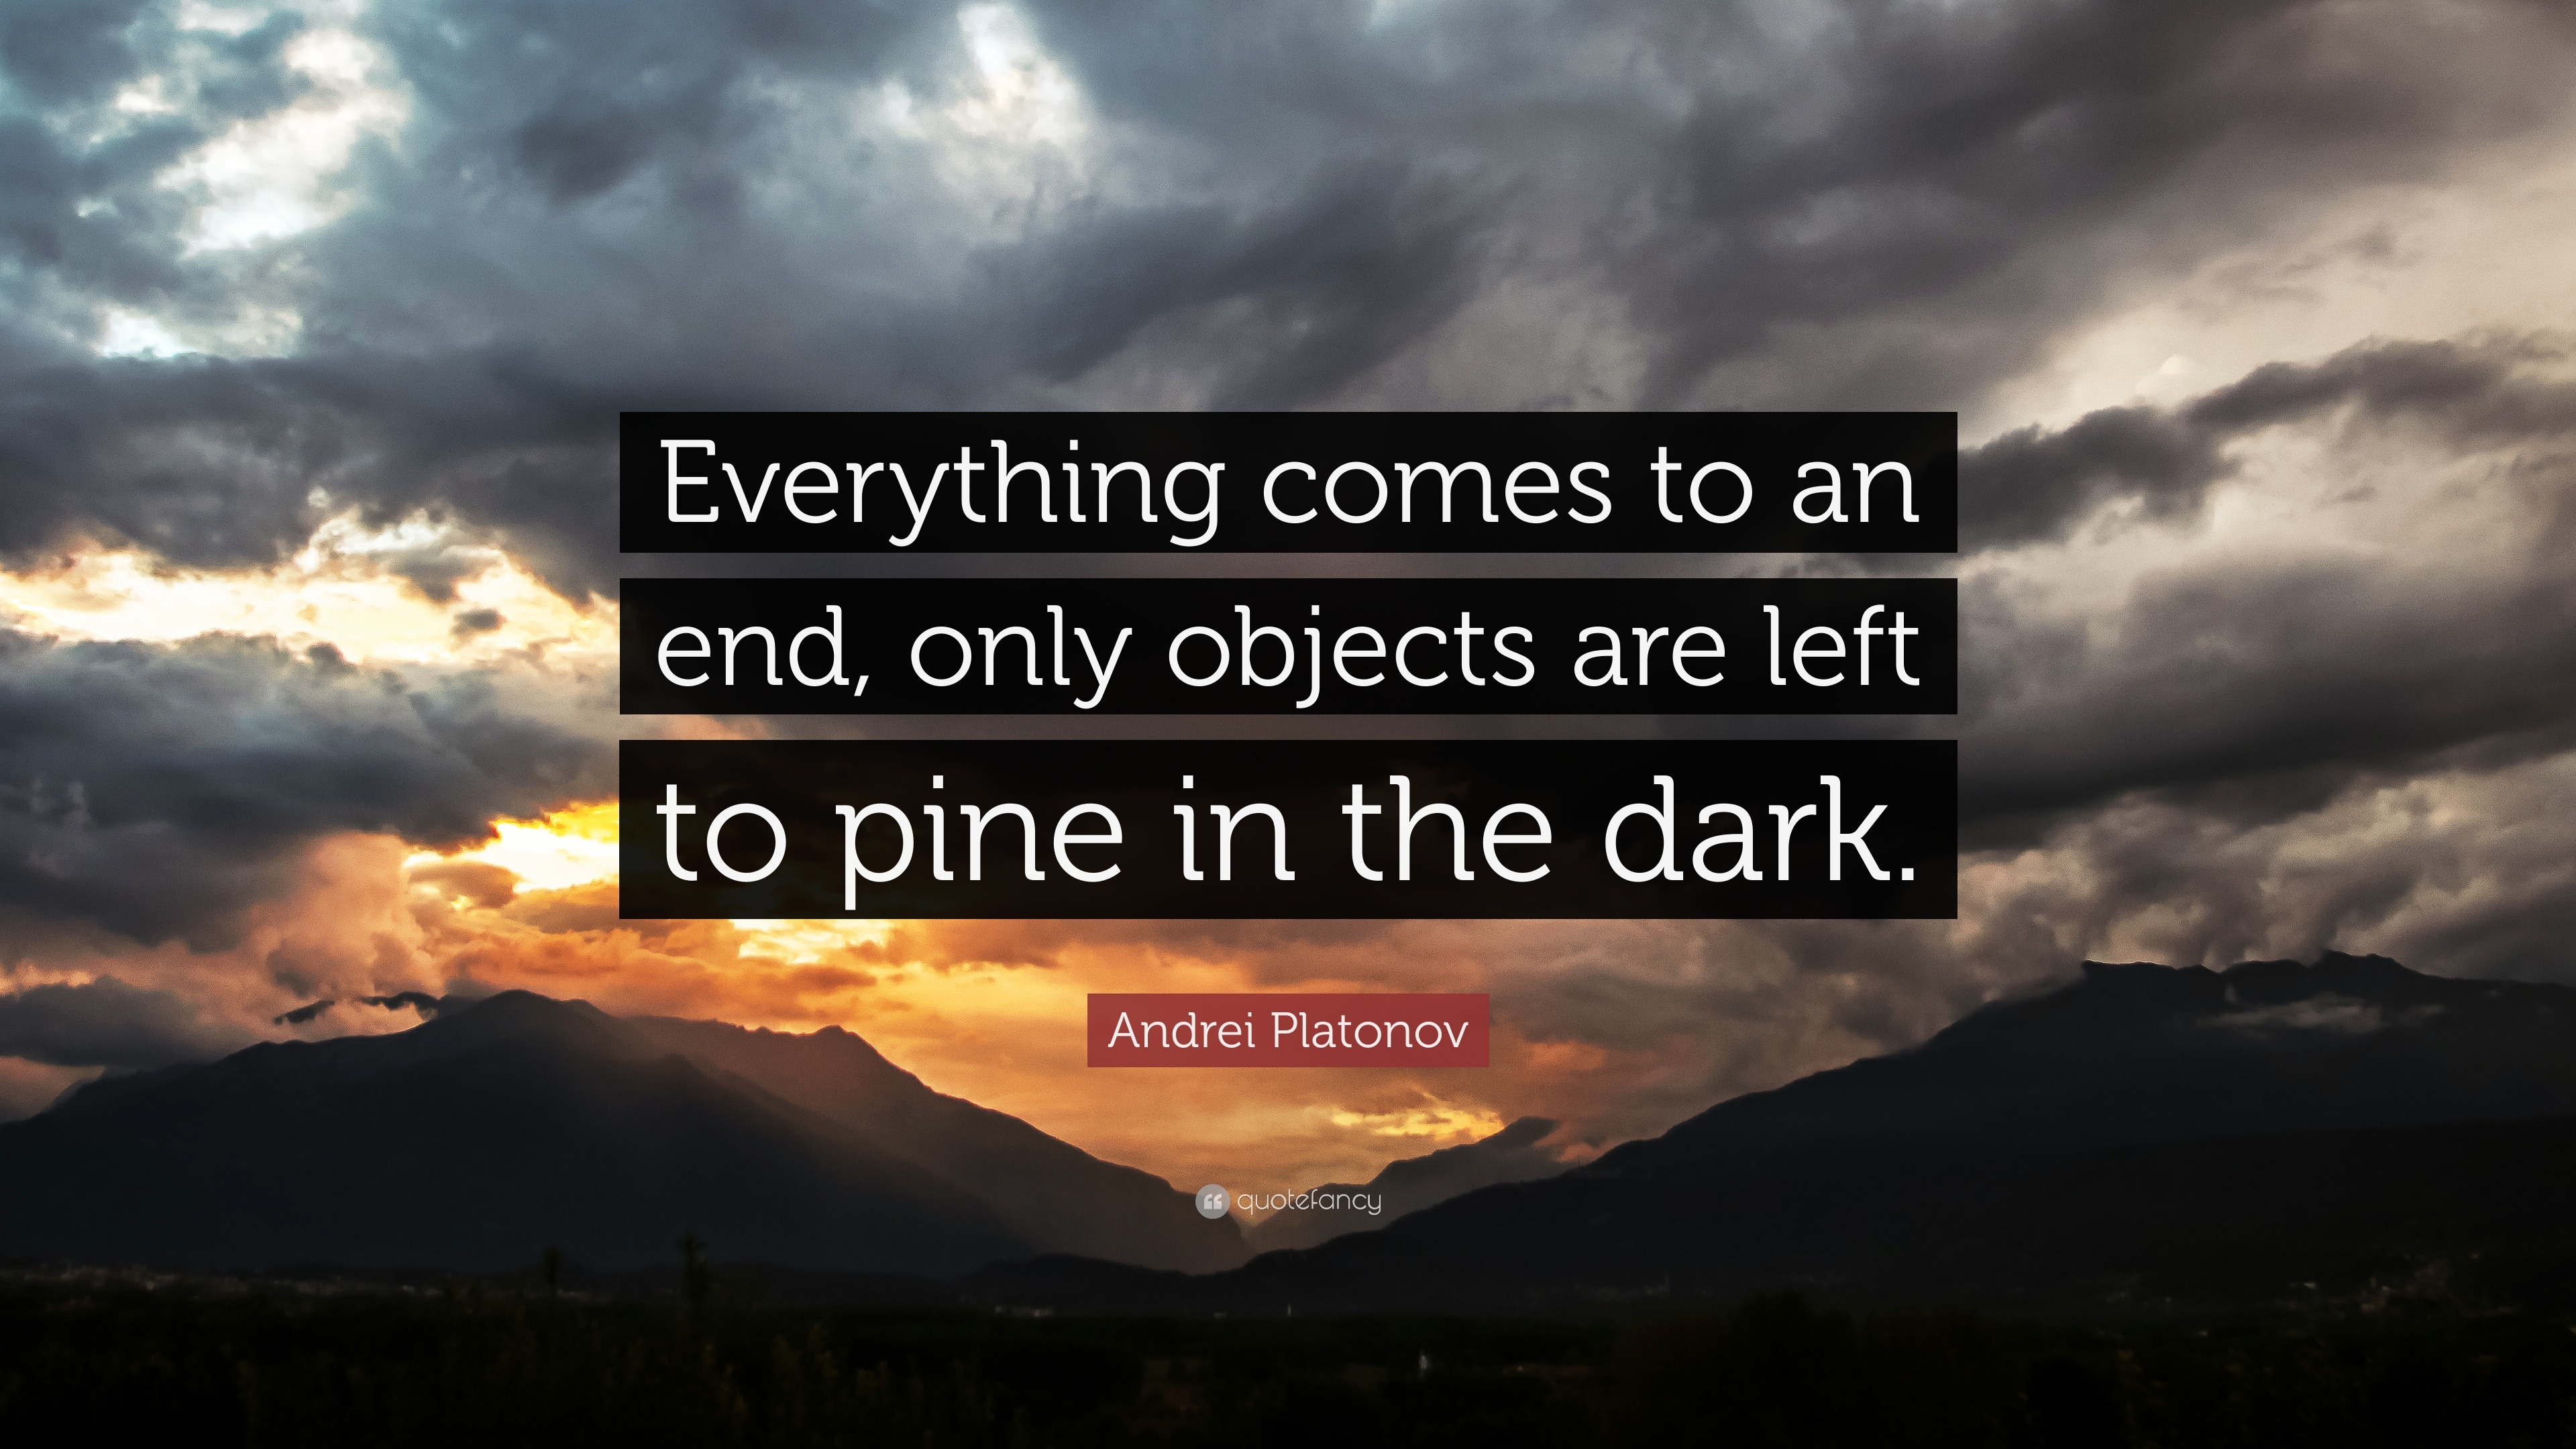 Andrei Platonov Quote: “Everything Comes To An End, Only Objects Are Left To Pine In The